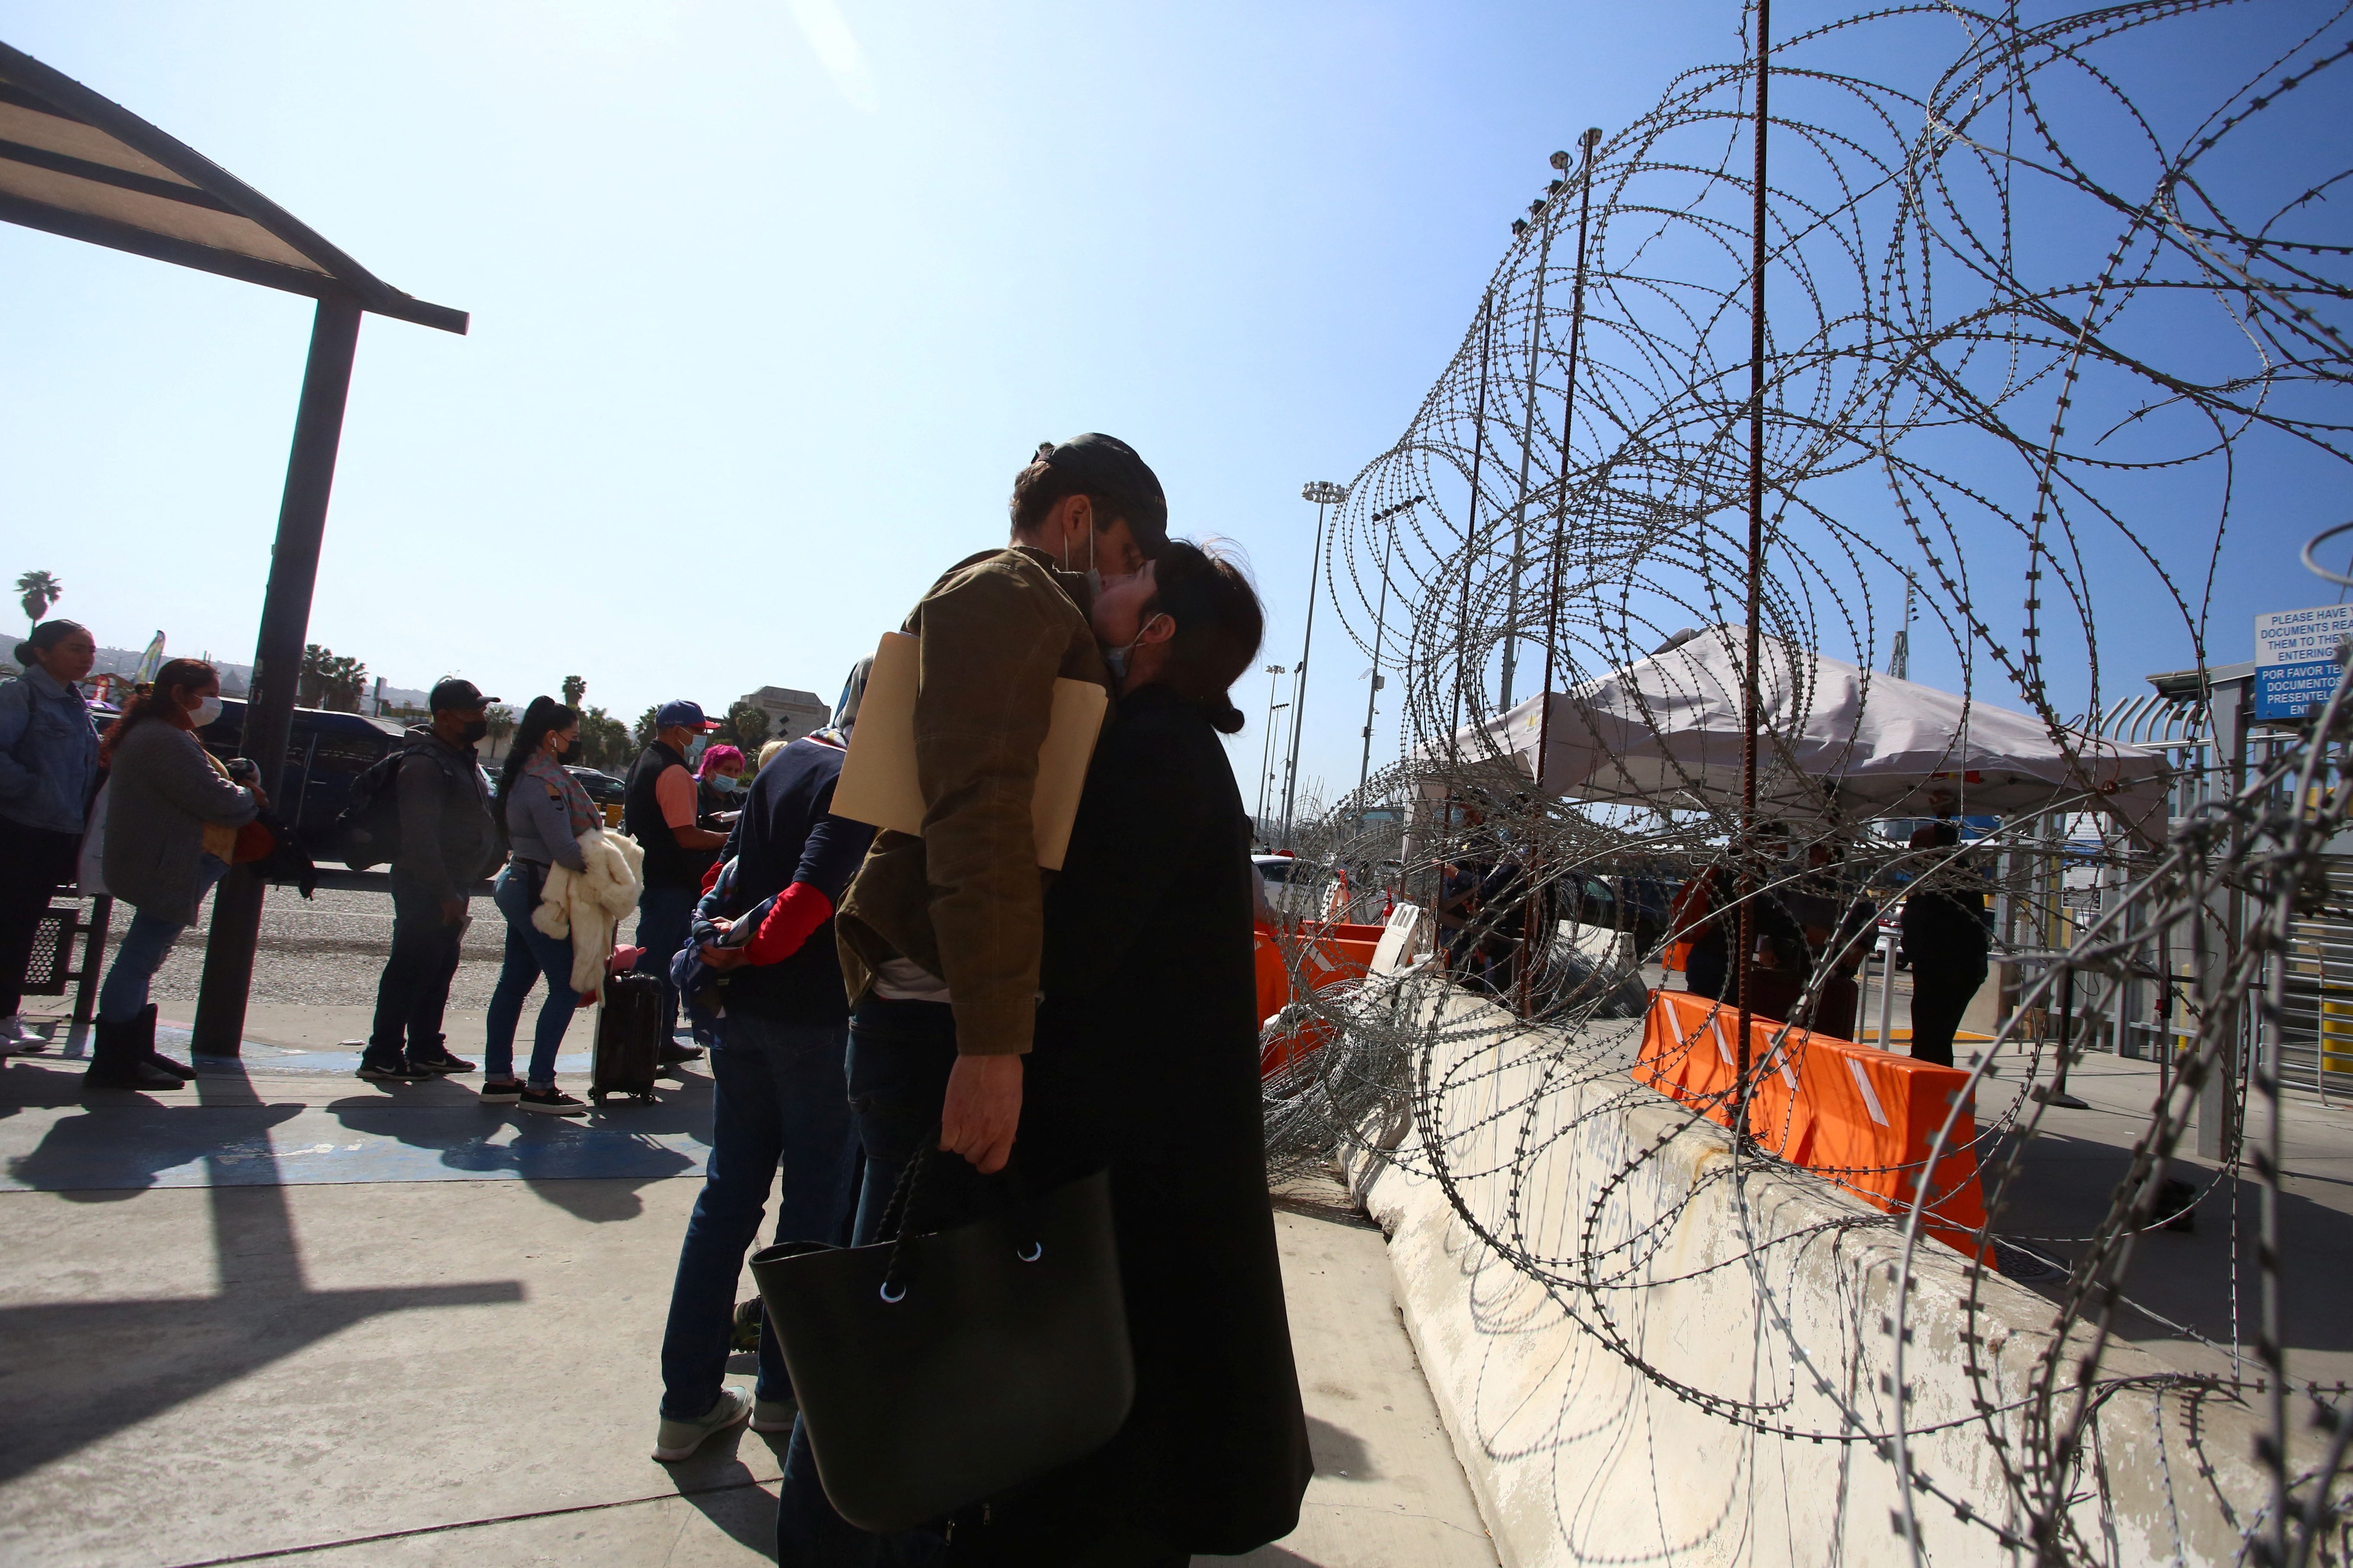 A Ukrainian woman hugs her boyfriend as he waits for a humanitarian visa outside the San Ysidro port of entry on the US-Mexico border in Tijuana, Mexico.  (REUTERS/Jorge Duenes).